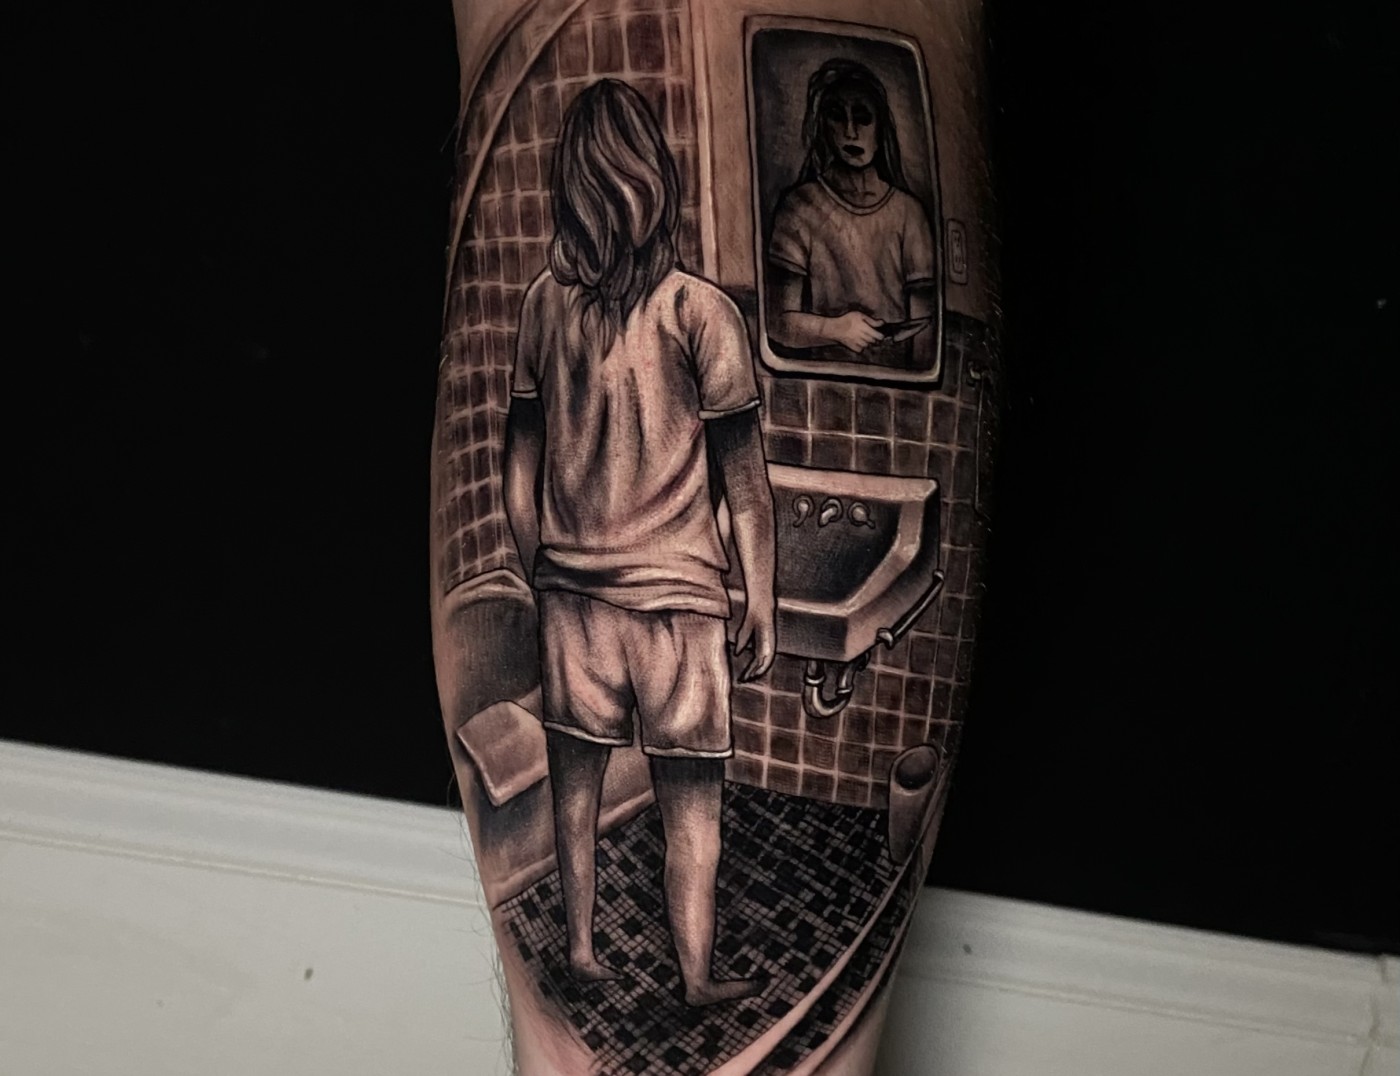 'Man in the Mirror' Blackwork Realism Tattoo By Rene Cristobal. Rene is a Chilean Tattoo Artist from Concepcion, Chile. This tattoo was completed at Iron Palm Tattoos. It represents a man examining himself and considering his past, present, and future choices. He is available for booking Sept 11th - Sept 23rd. Call 404-973-7828 or stop by for a free consultation with Rene. Walk ins are welcome.